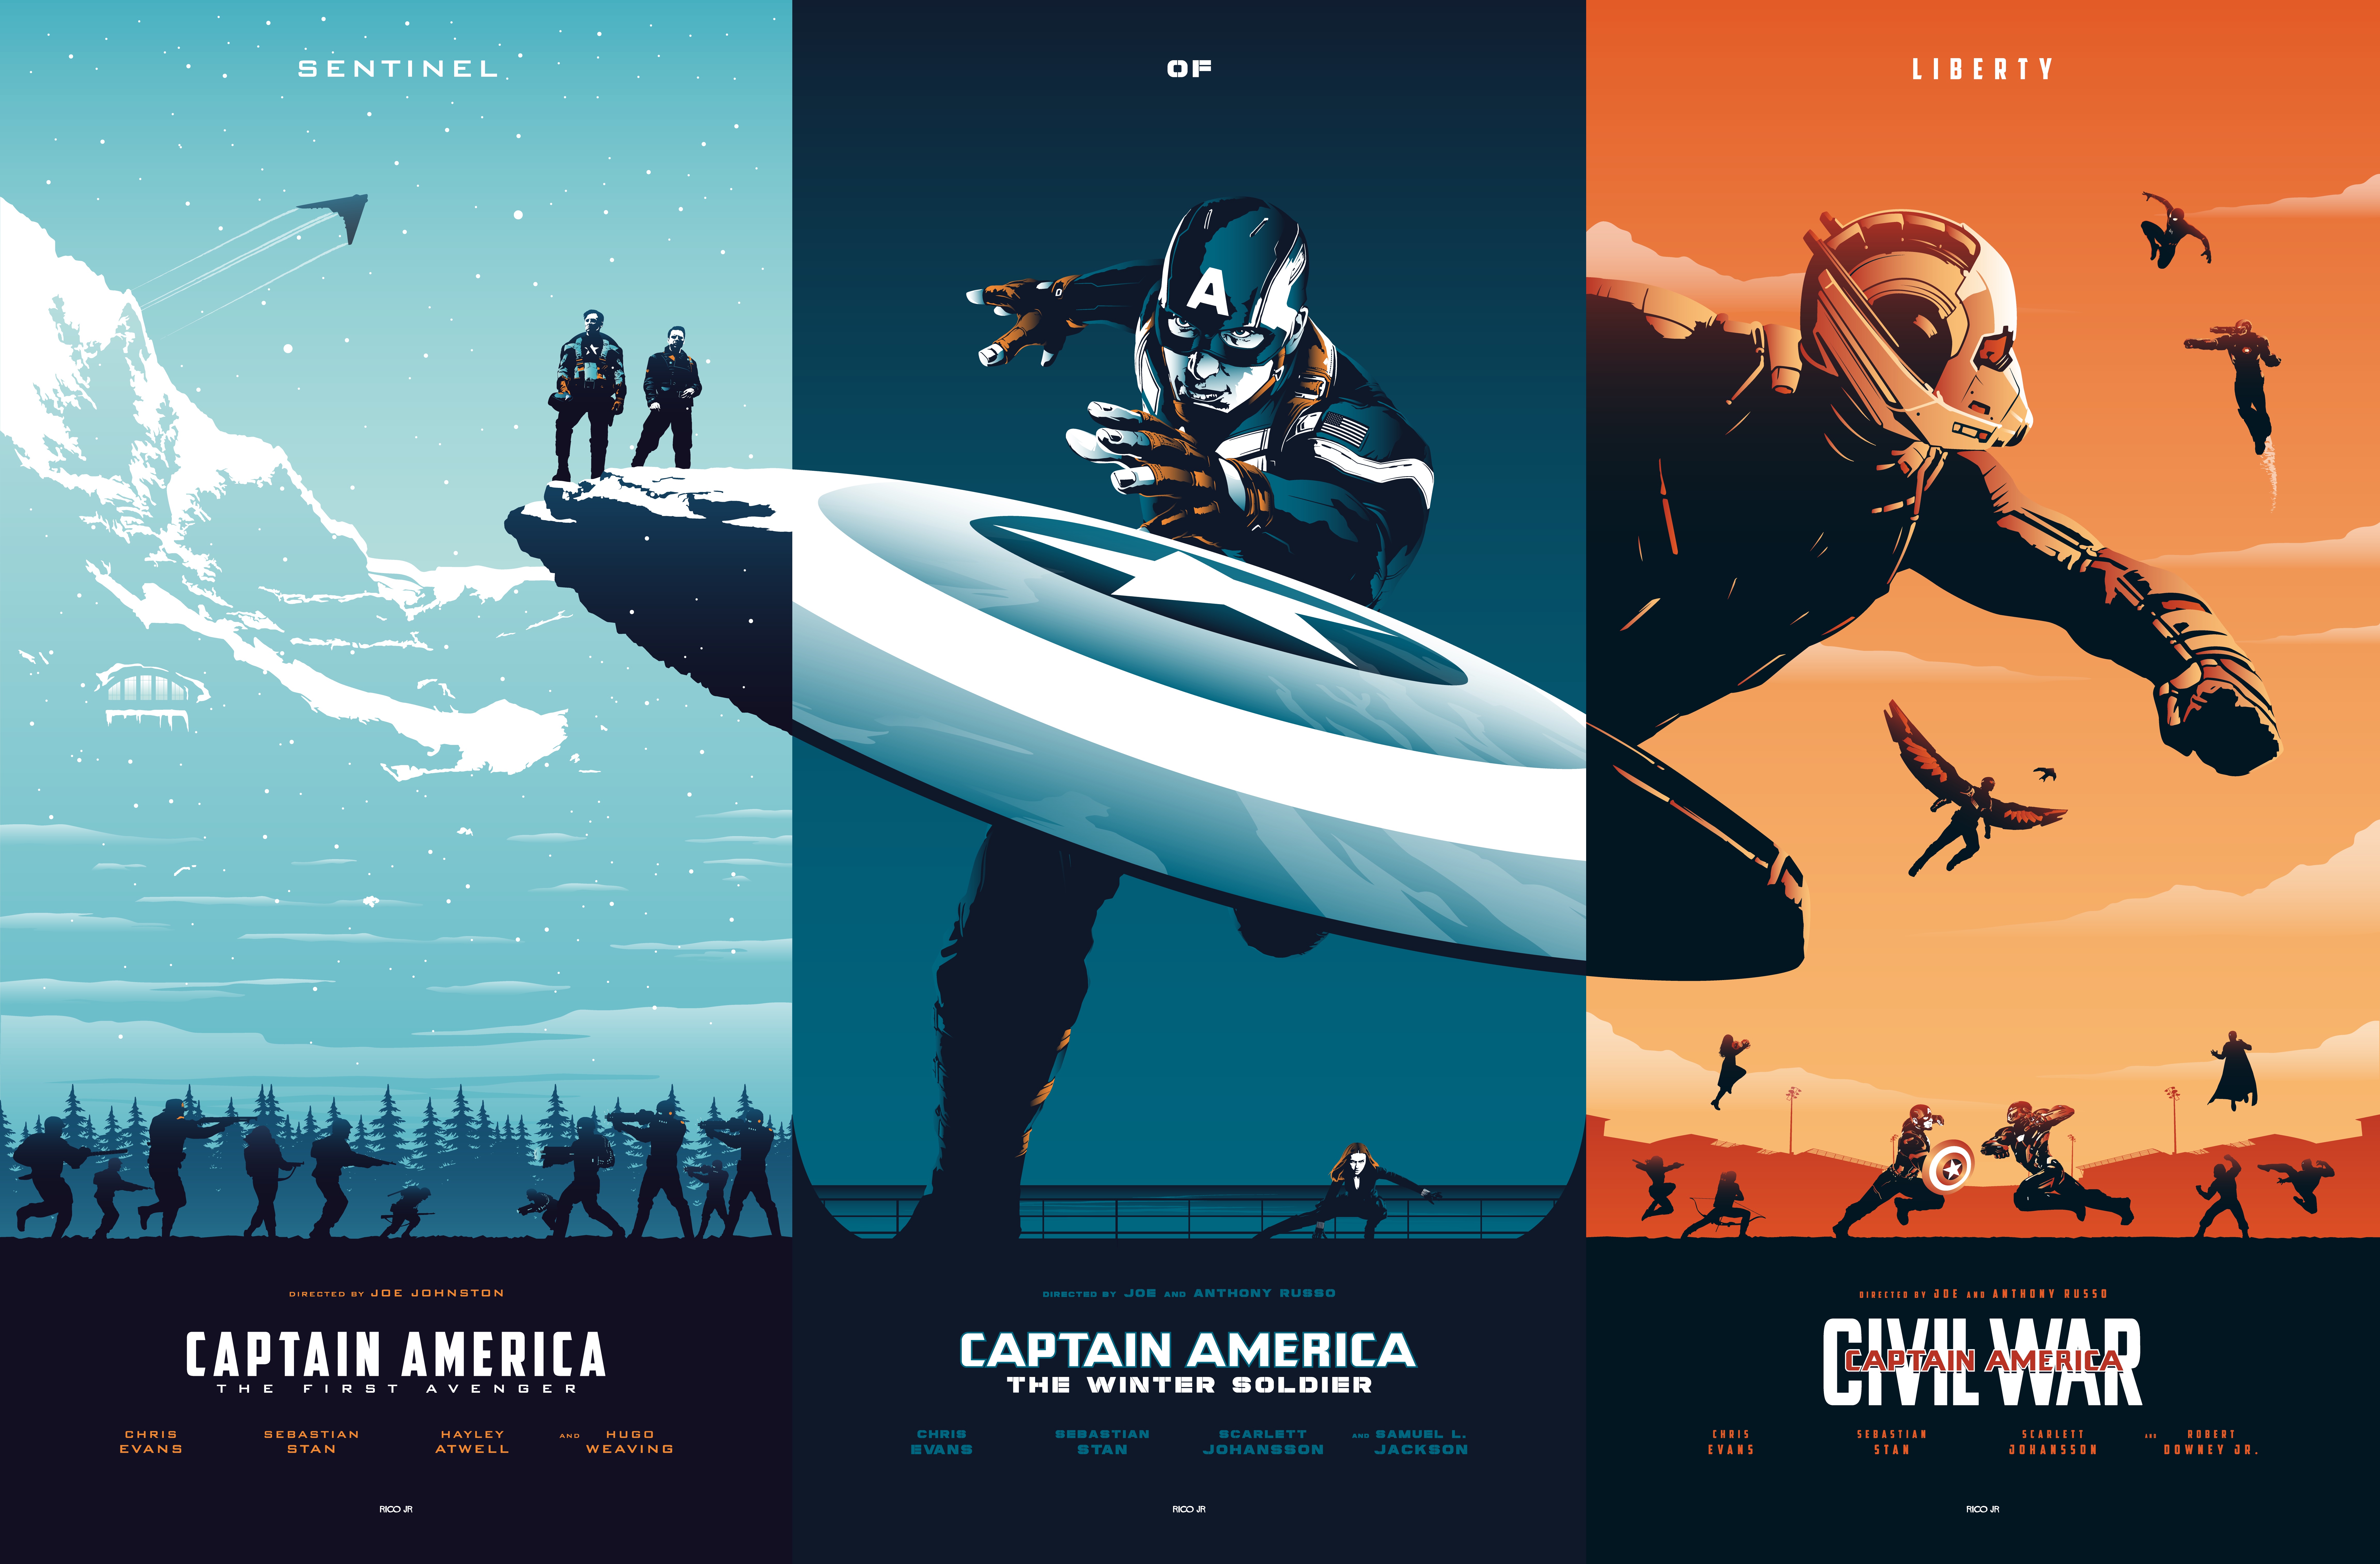 General 9213x6053 Captain America Captain America: Civil War Captain America: The First Avenger Captain America: The Winter Soldier movies movie poster Ant-Man Marvel Cinematic Universe digital art